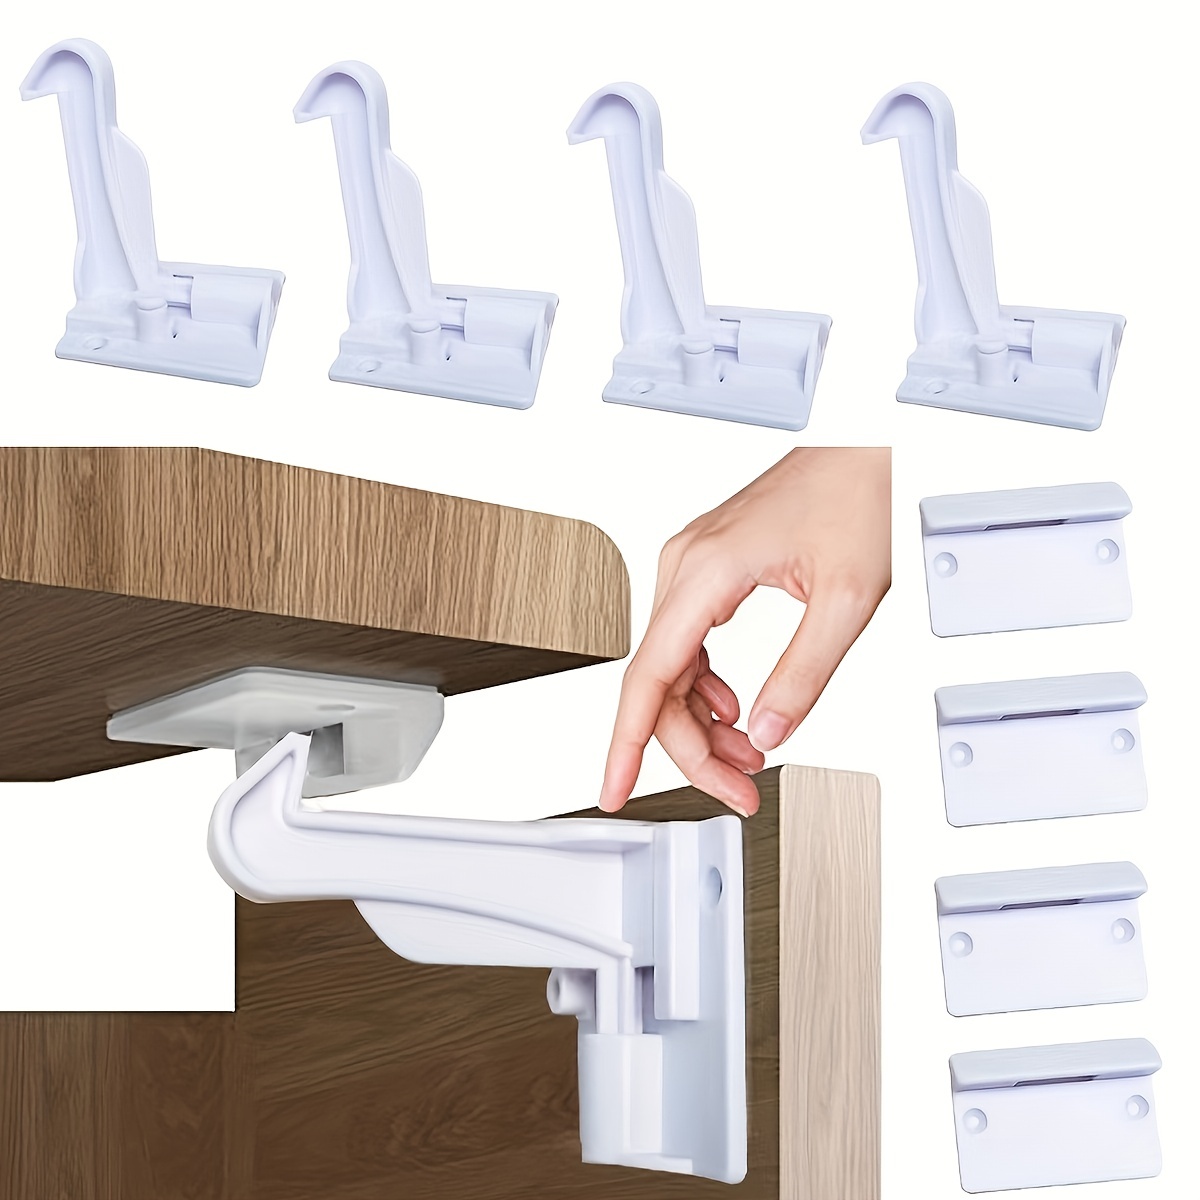 

4pcs Cabinet Locks, Safety Latches Invisible Adhesive Proofing Drawer Locks, No Drilling Installation